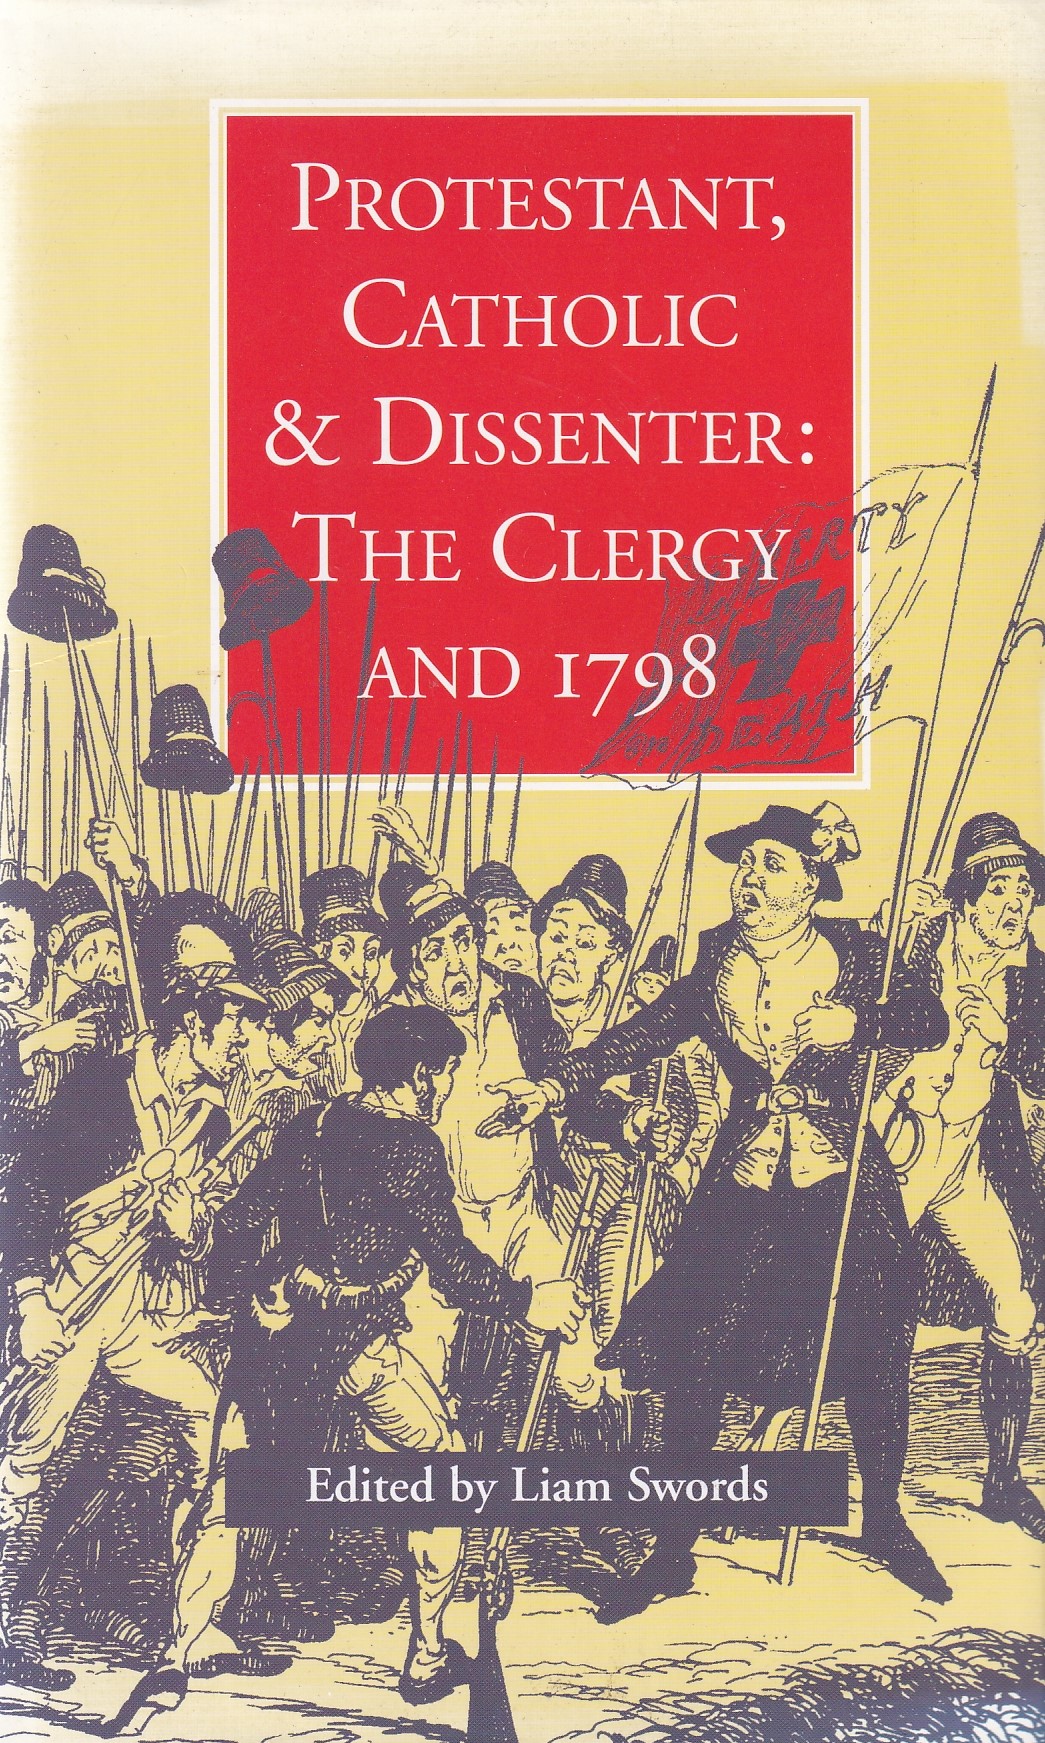 Protestant, Catholic and Dissenter: The Clergy and 1798 by Swords, Liam